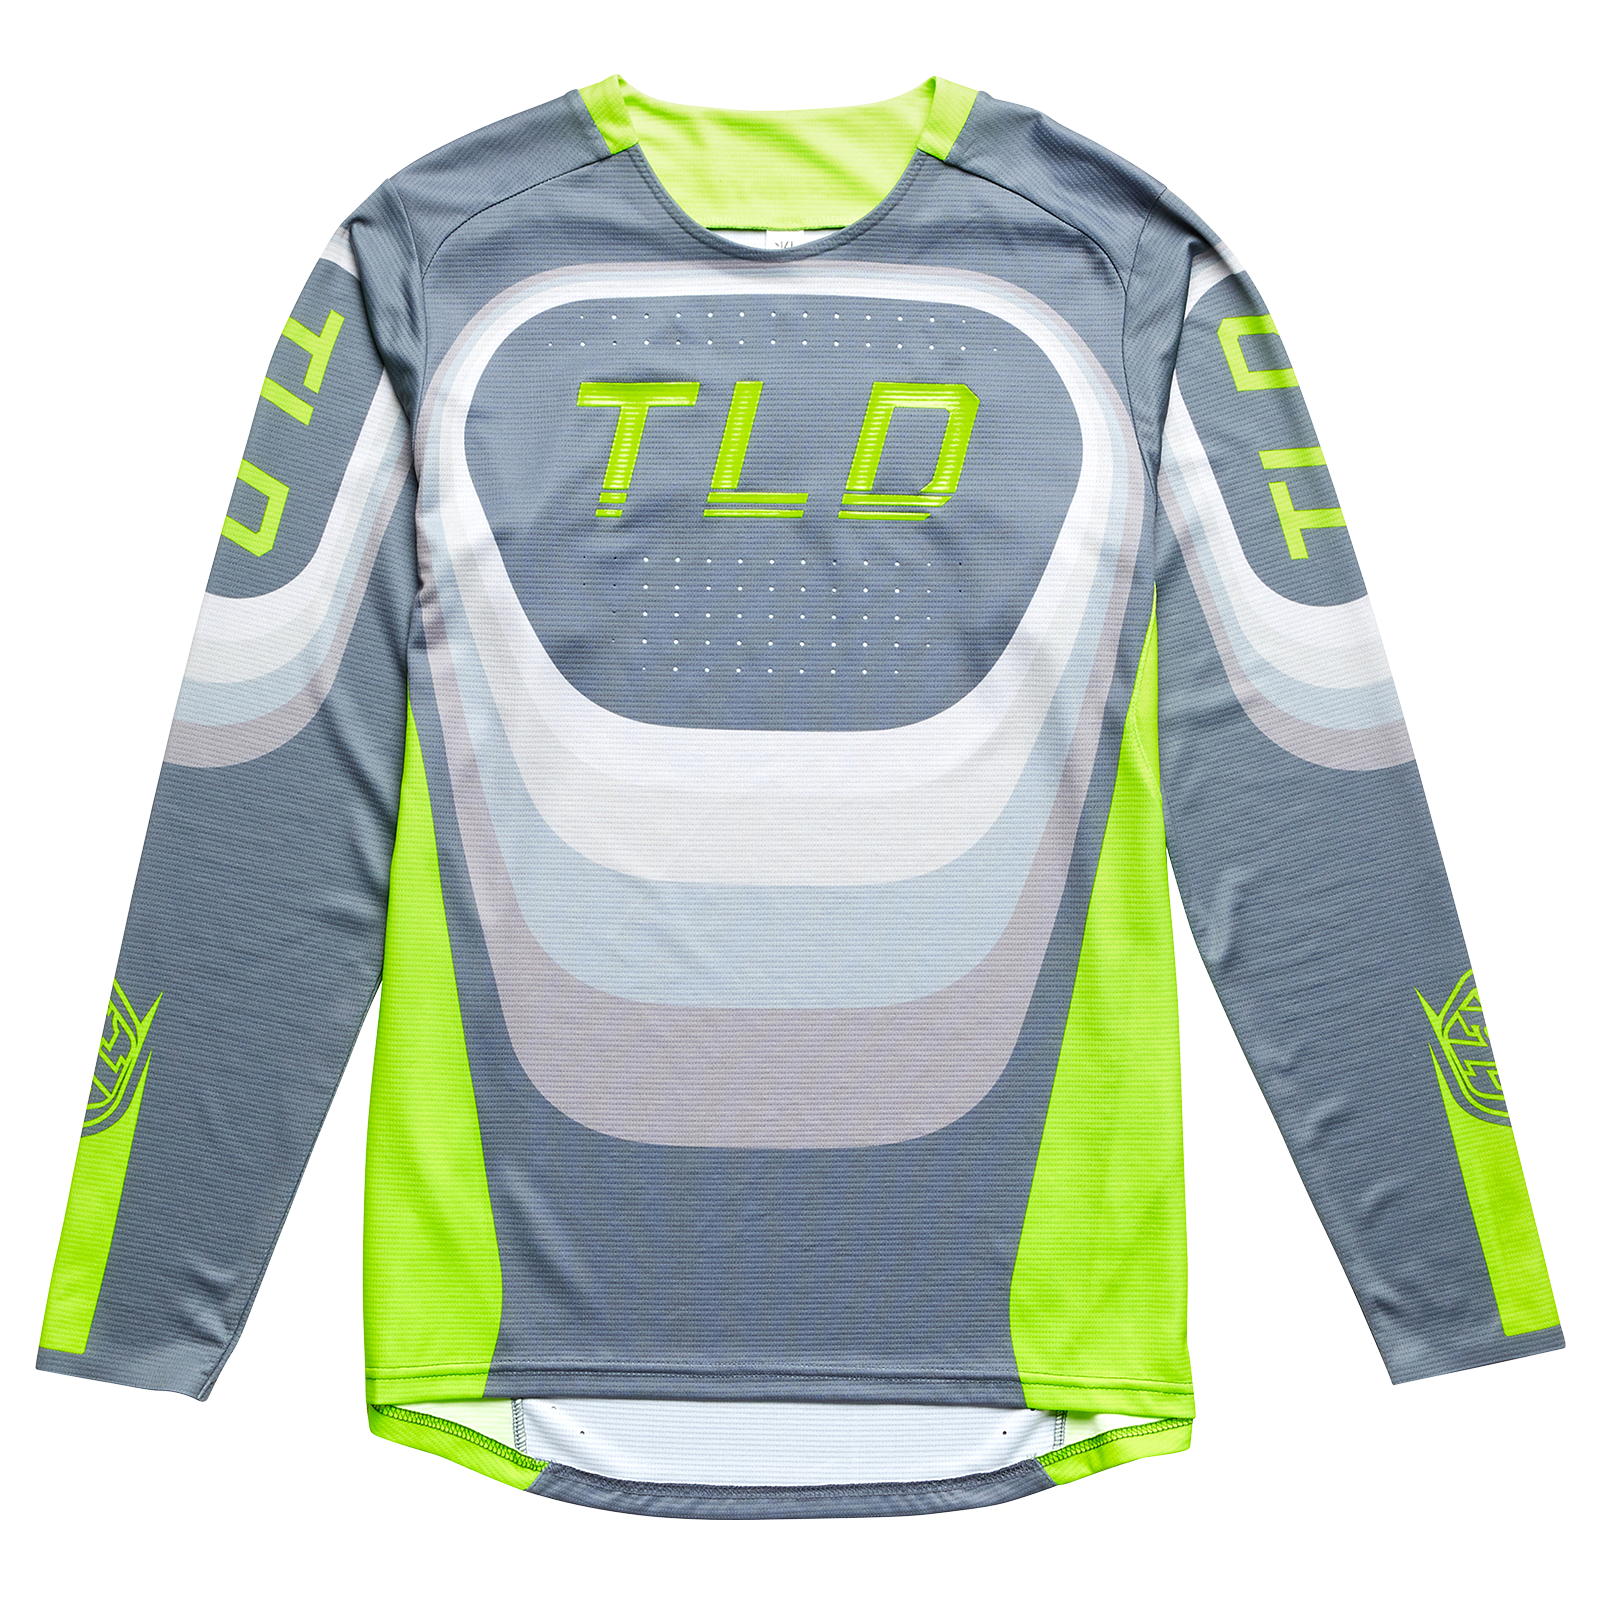 TLD Youth Sprint jersey featuring grey, white, and neon green colors with TLD branding, ideal for BMX races and versatile kits.